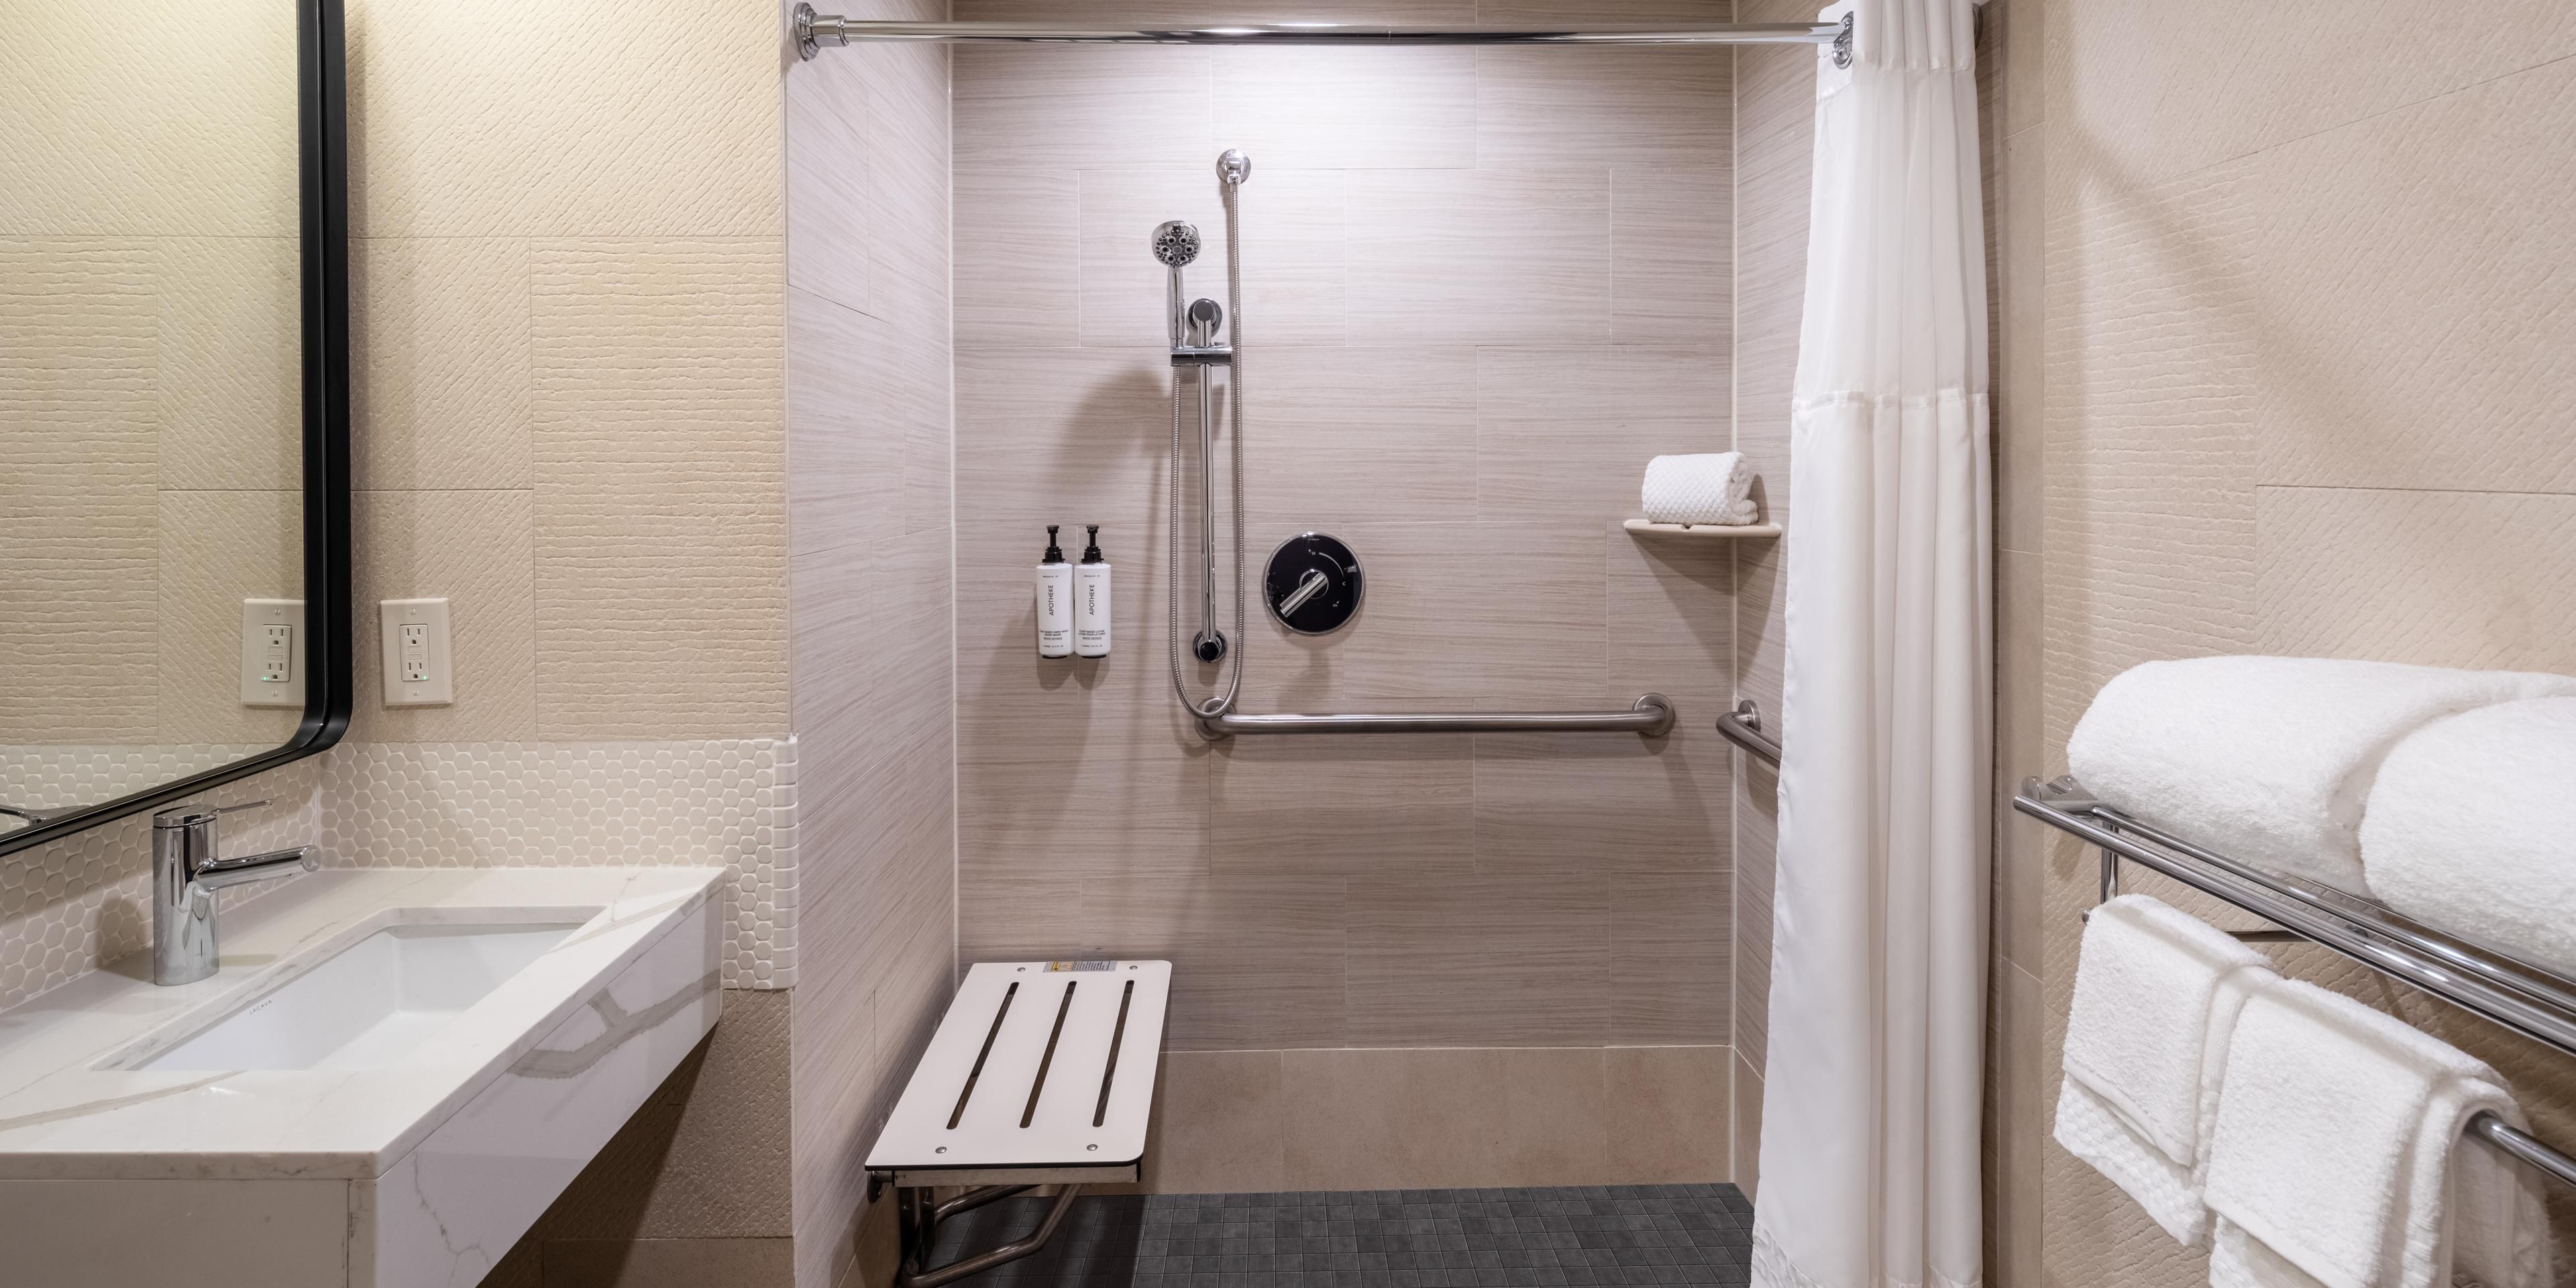 Mobility accessible rooms feature roll-in shower.